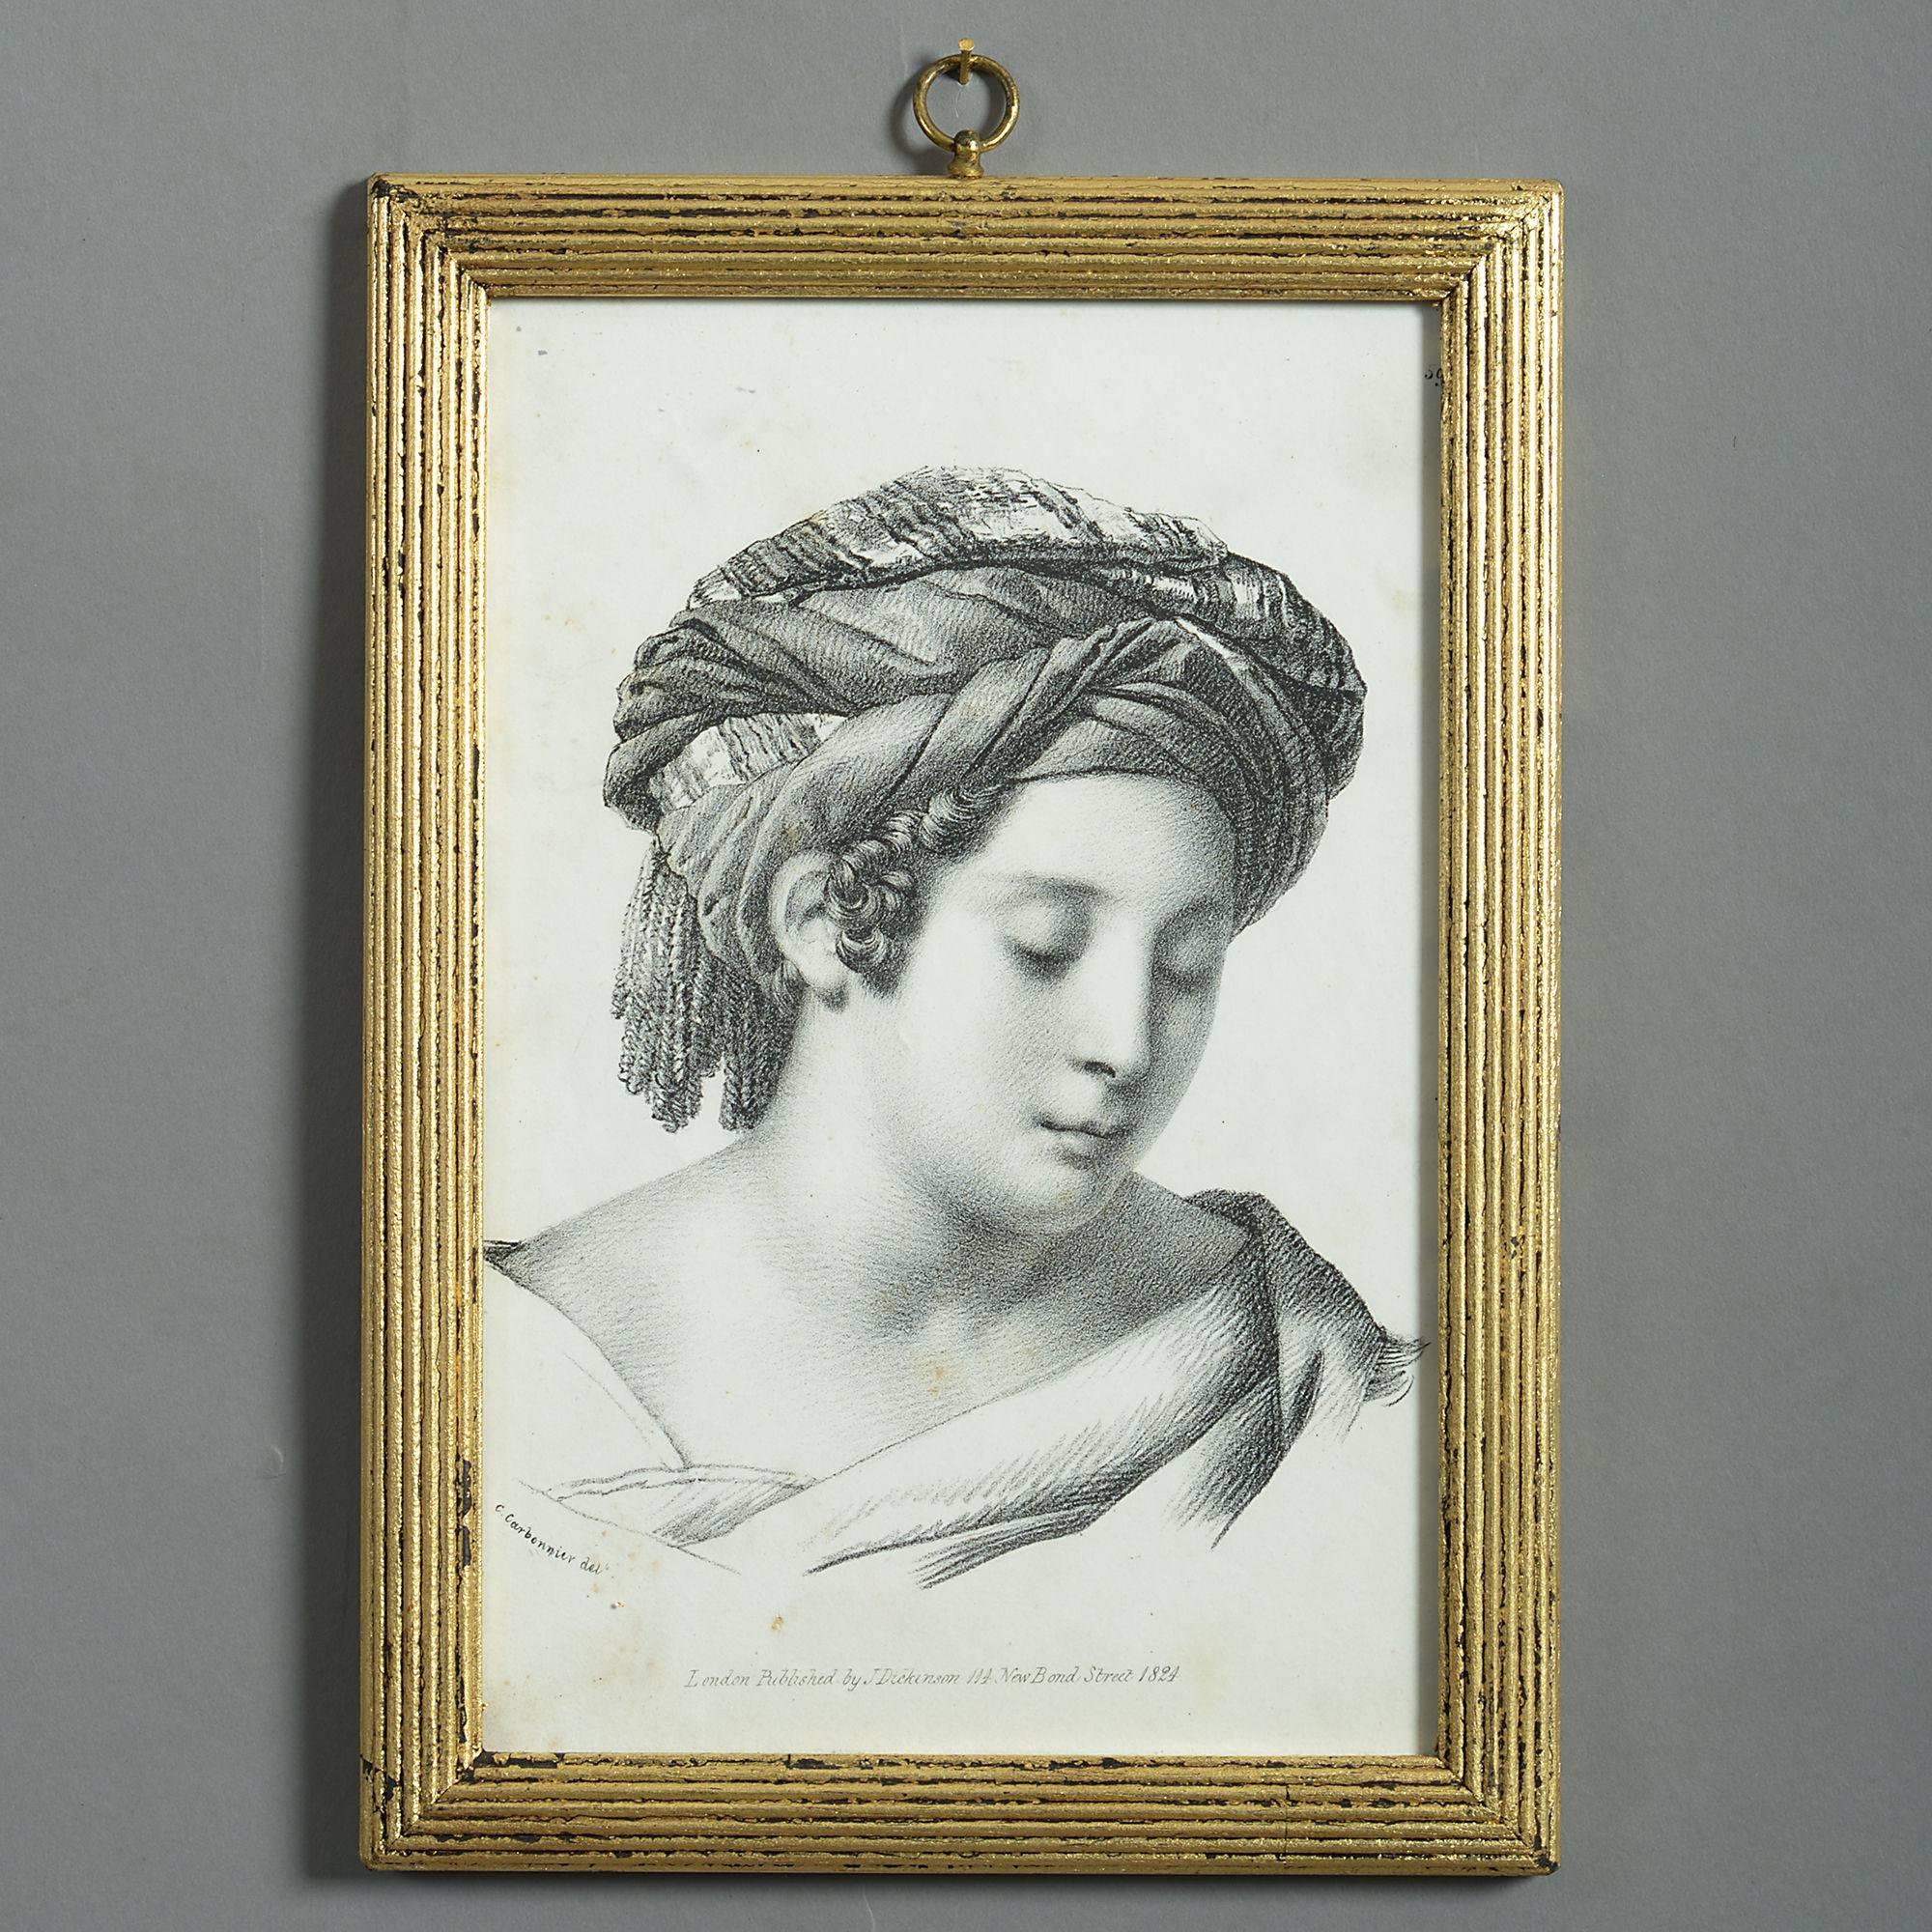 A set of 12 early 19th century etchings, each a study of a male or female face, depicted in the Greek and Roman tastes, defining beauty in the Classical manner. 

Set is reeded gilt frames. 

Framed dimensions listed refer to each individual